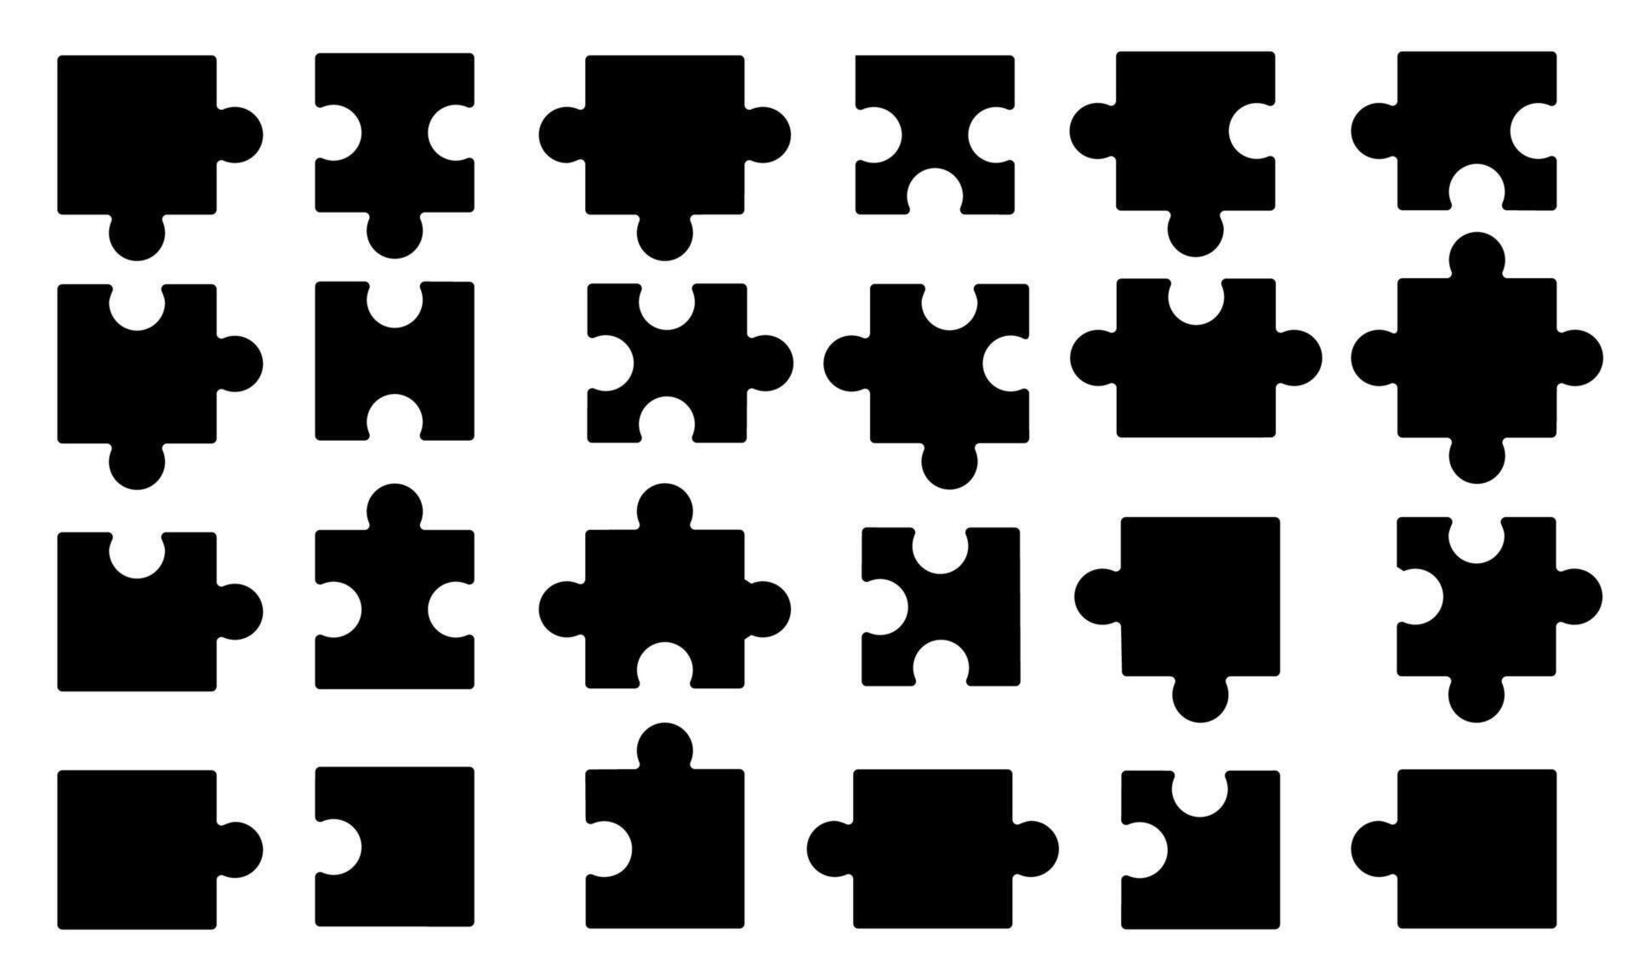 Puzzle pieces. Abstract jigsaw symbols for team game, blank variation tile parts fun concentration logic toy. Vector isolated collection